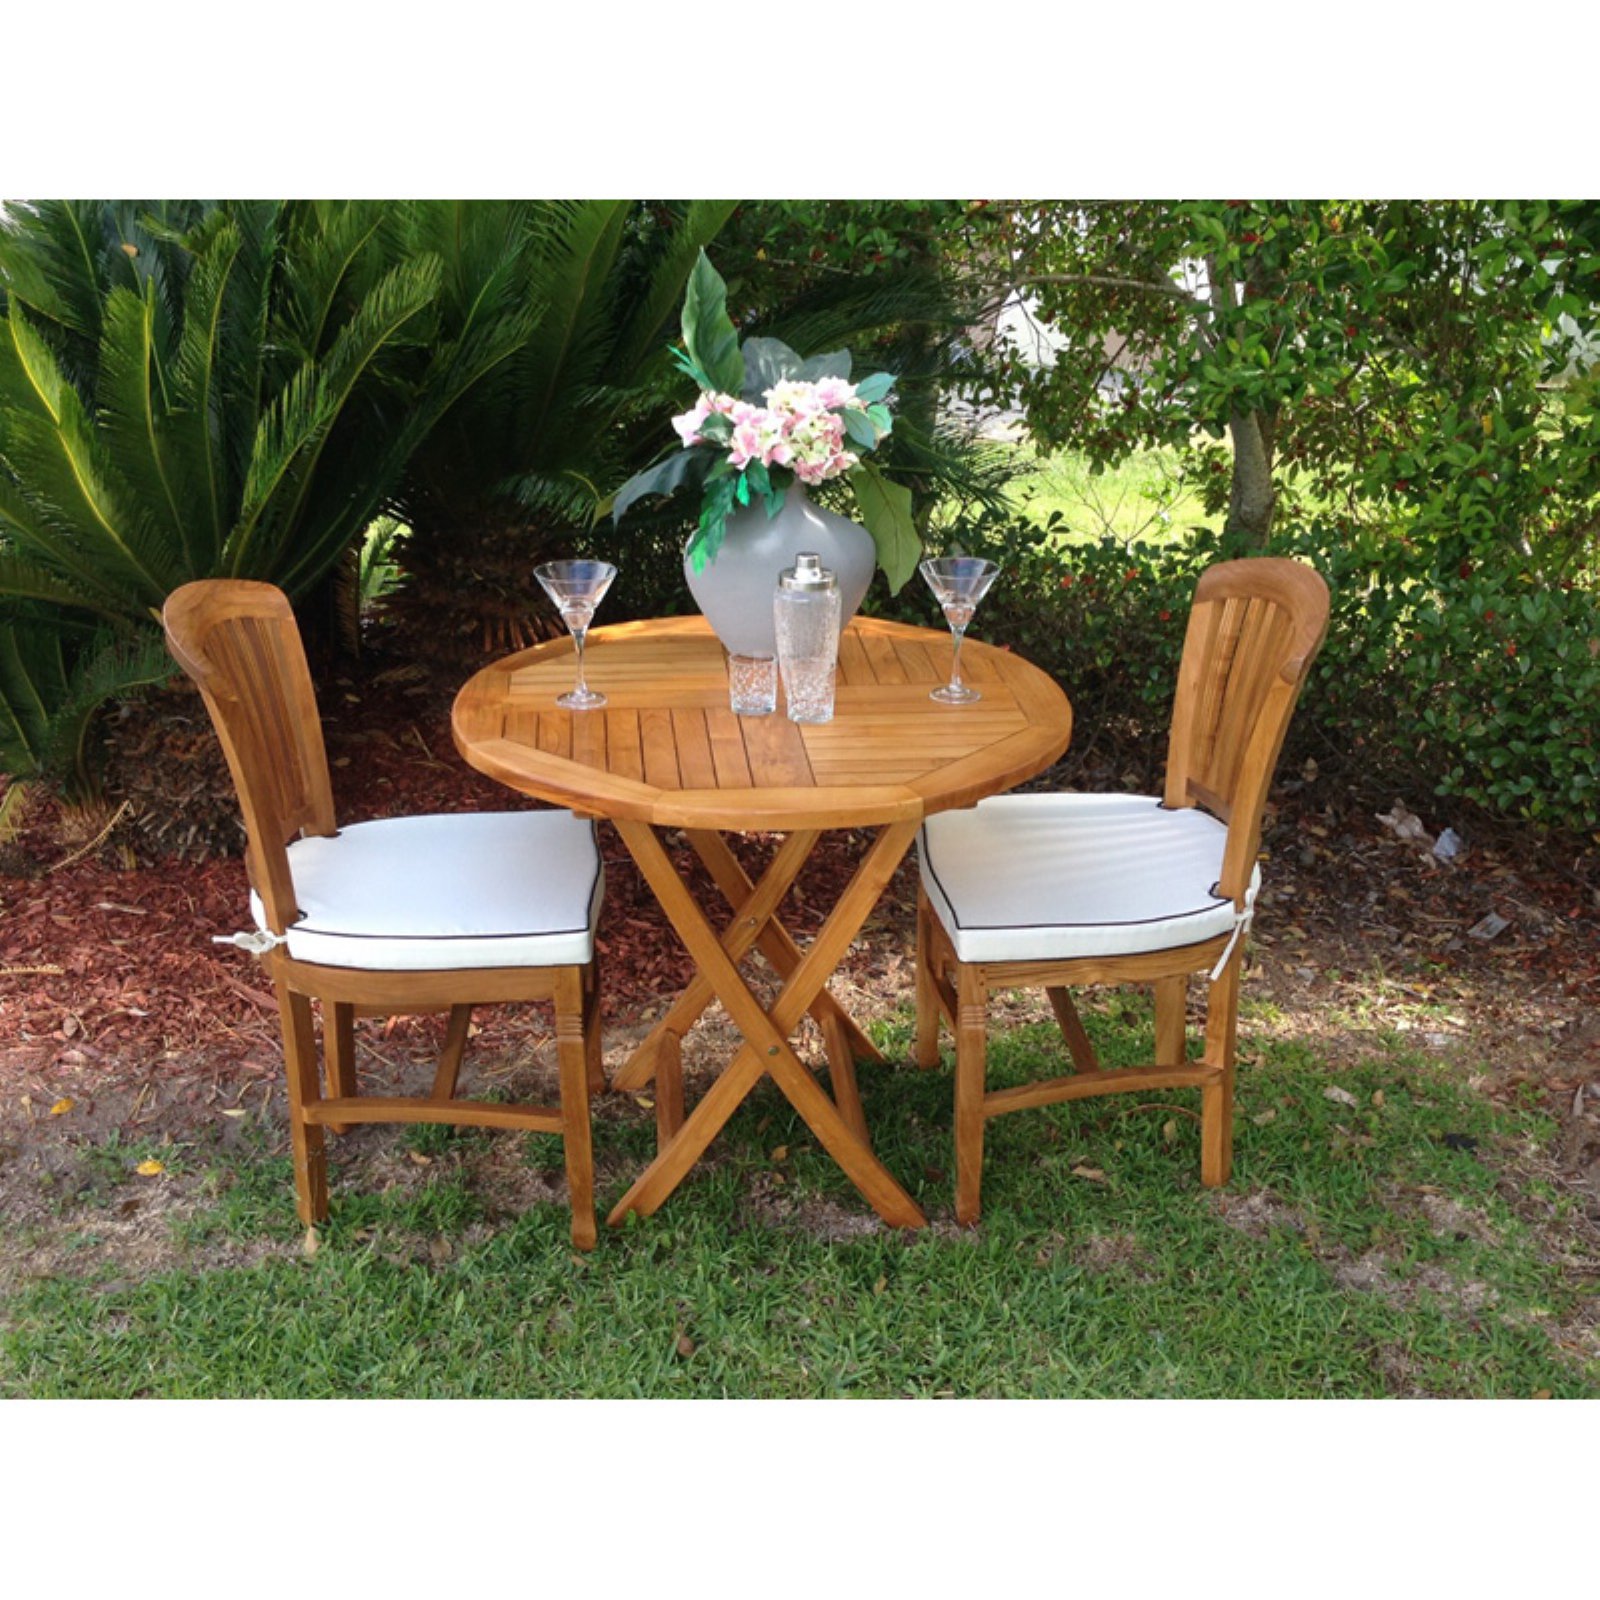 Chic Teak Orleans 3 Piece Patio Bistro Set with Optional Cushions - image 3 of 6